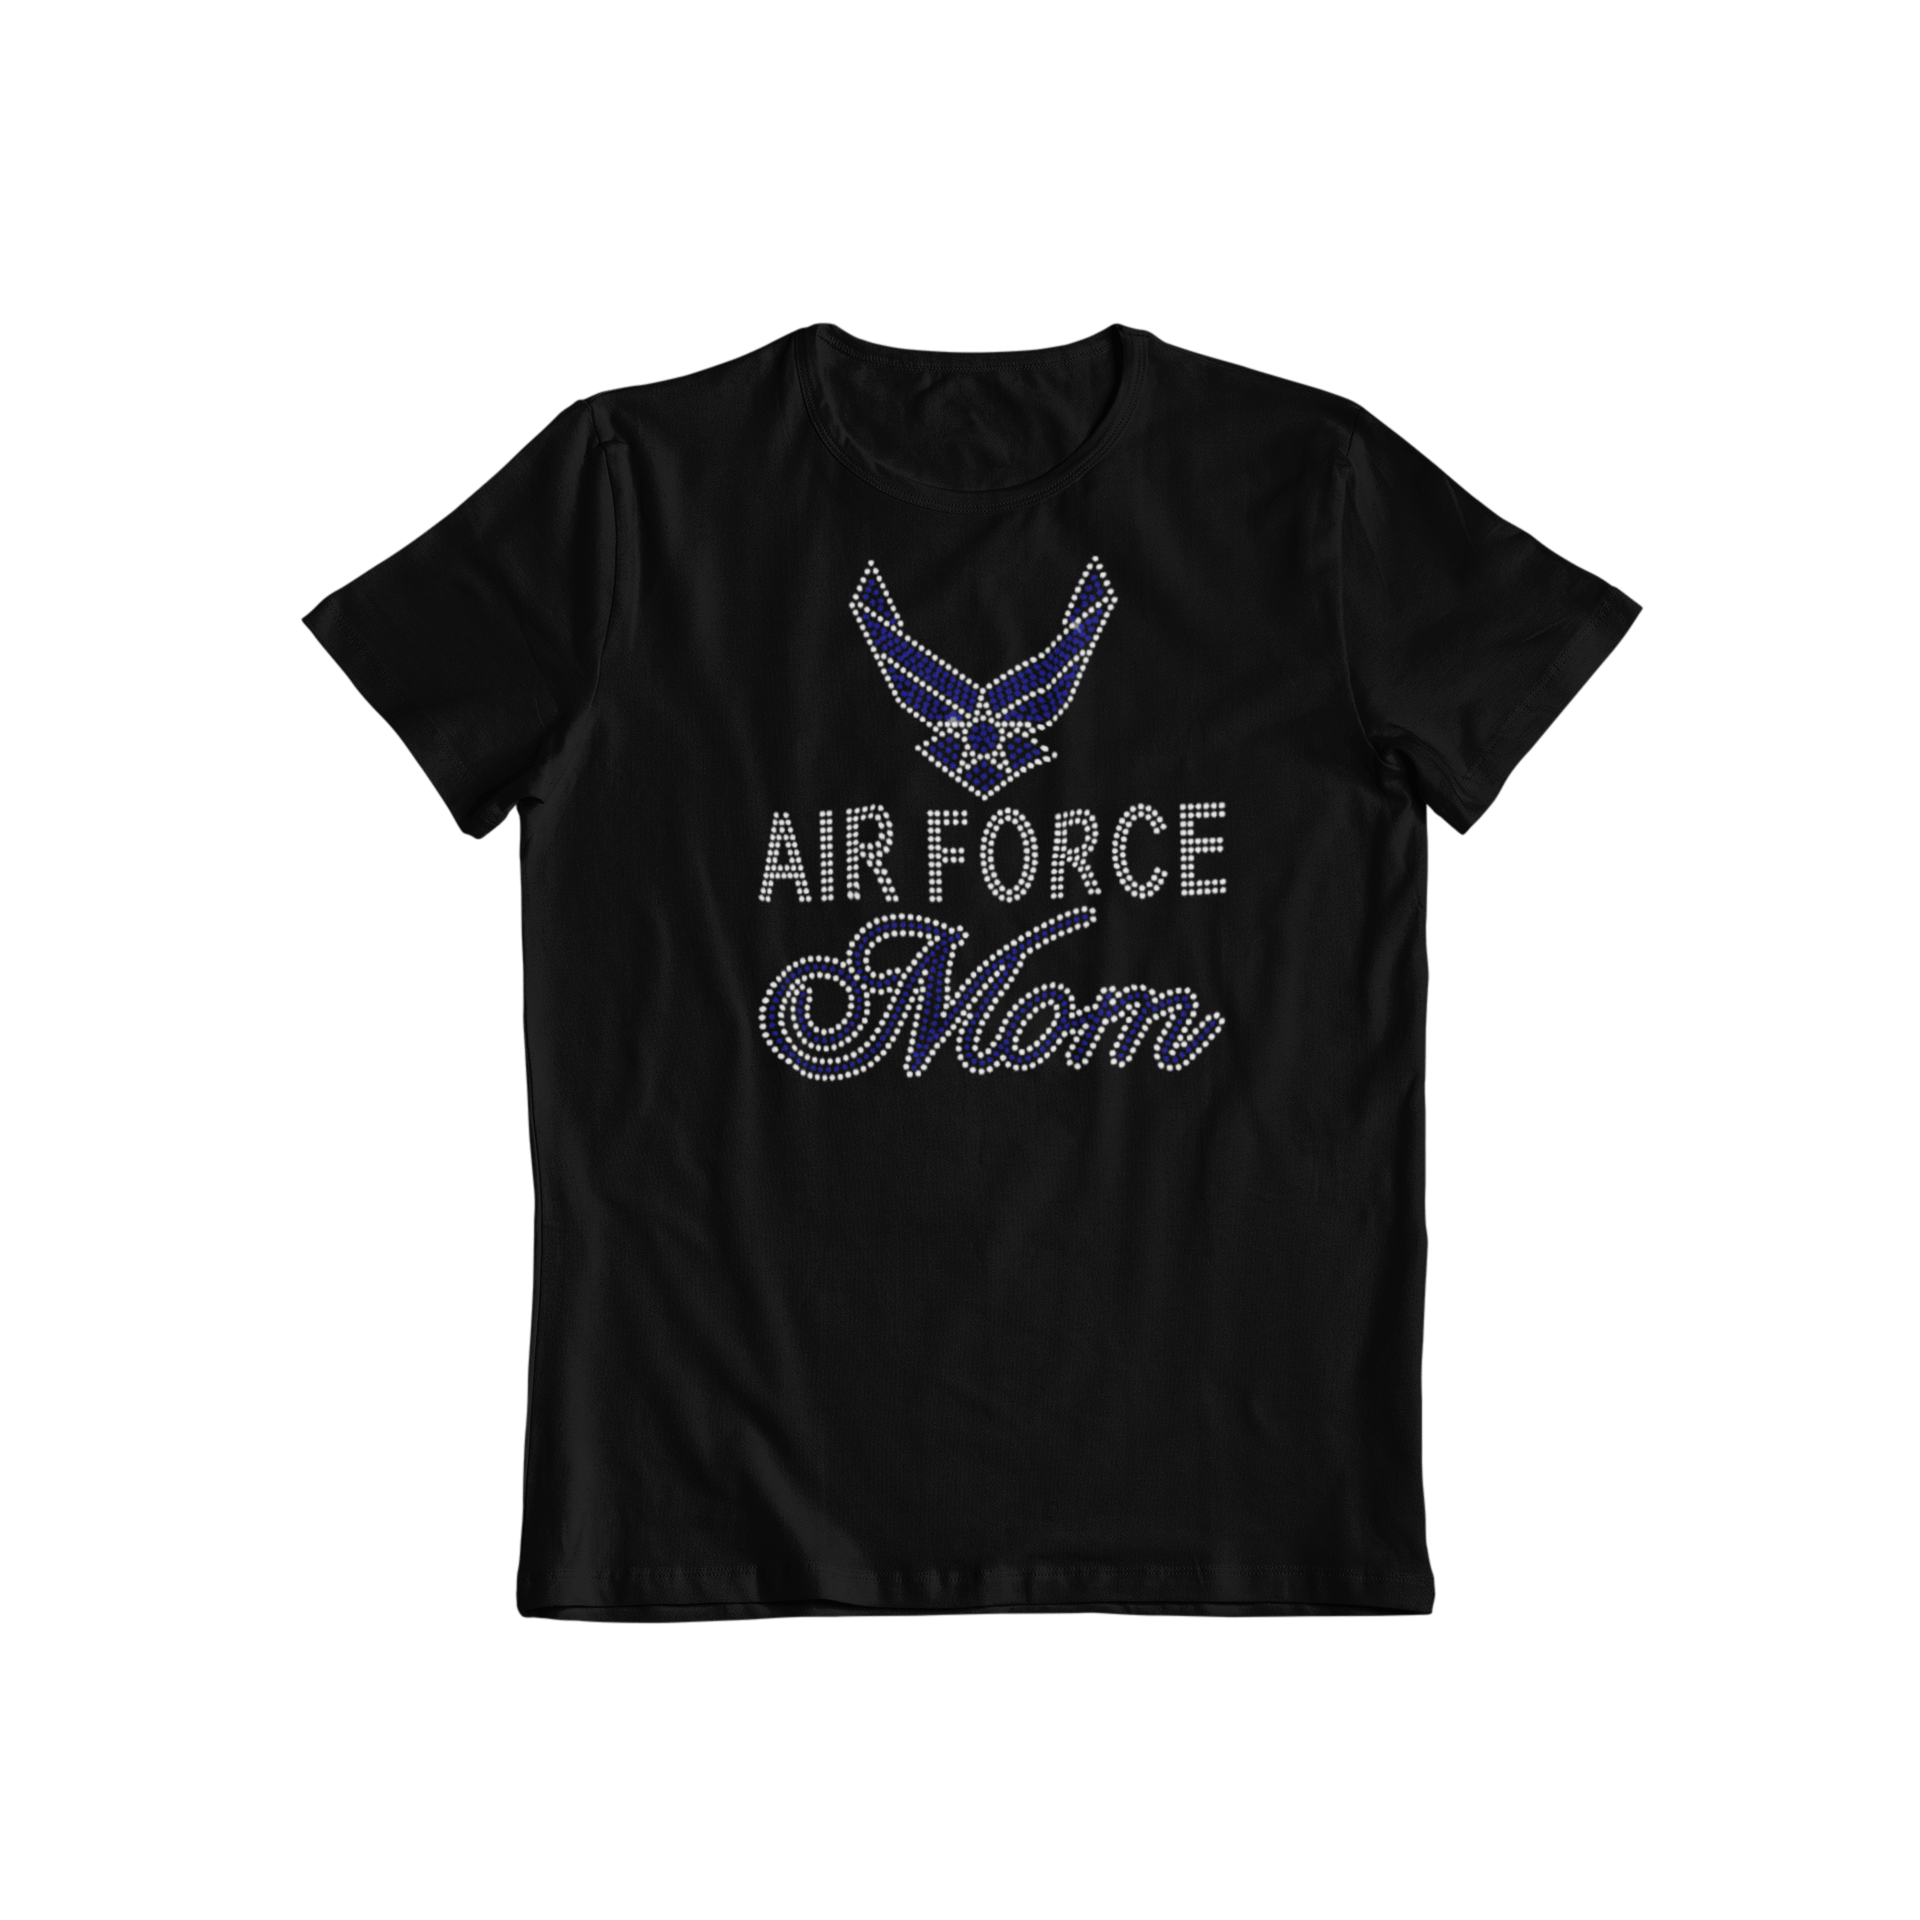 Air Force Mom Rhinestone T-Shirt-Get Me Bedazzled